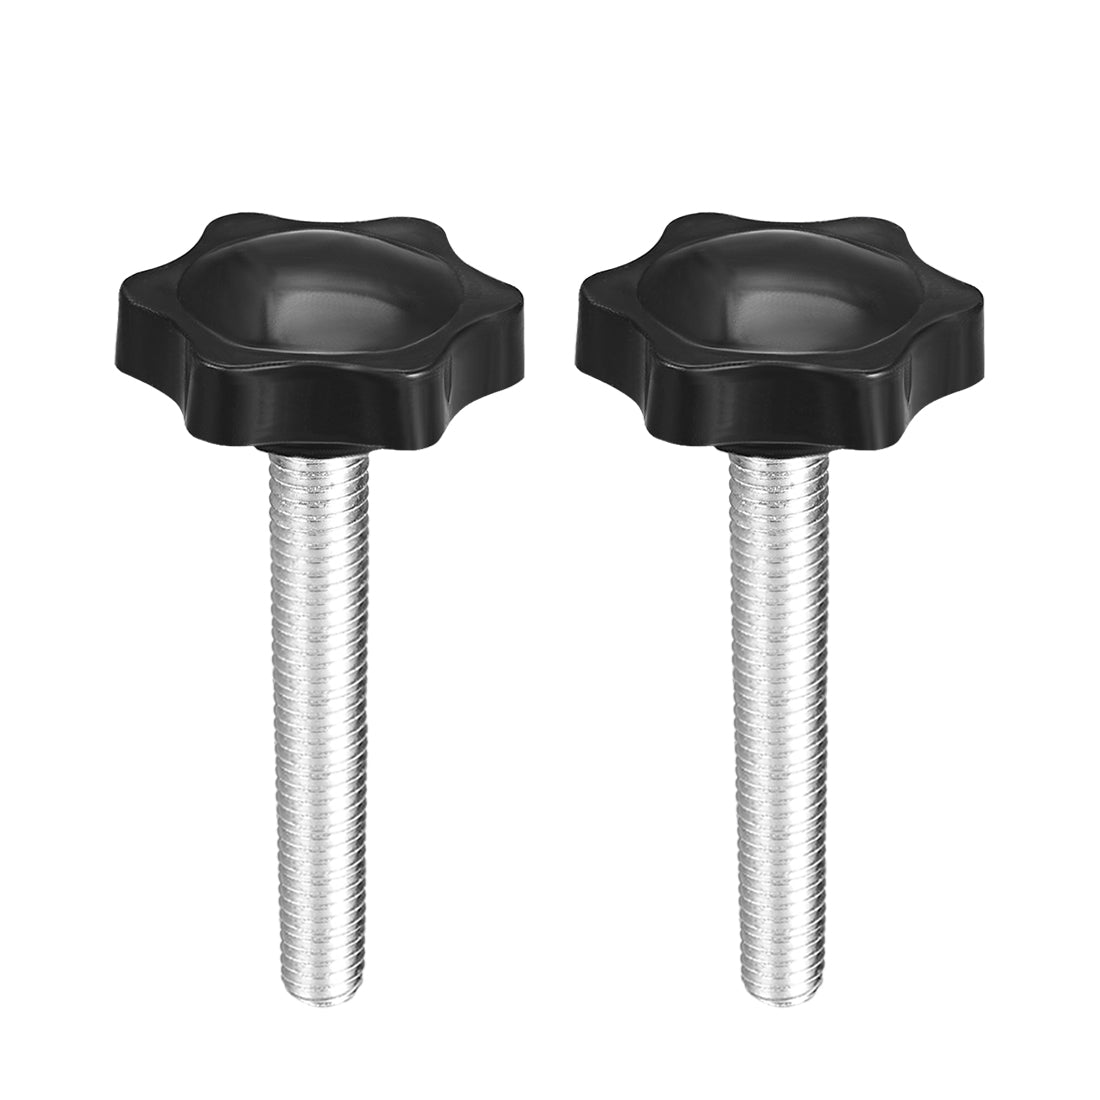 uxcell Uxcell Clamping Screw Knob Plum Hex Shaped Grips Star Knob Male Thread 2pcs